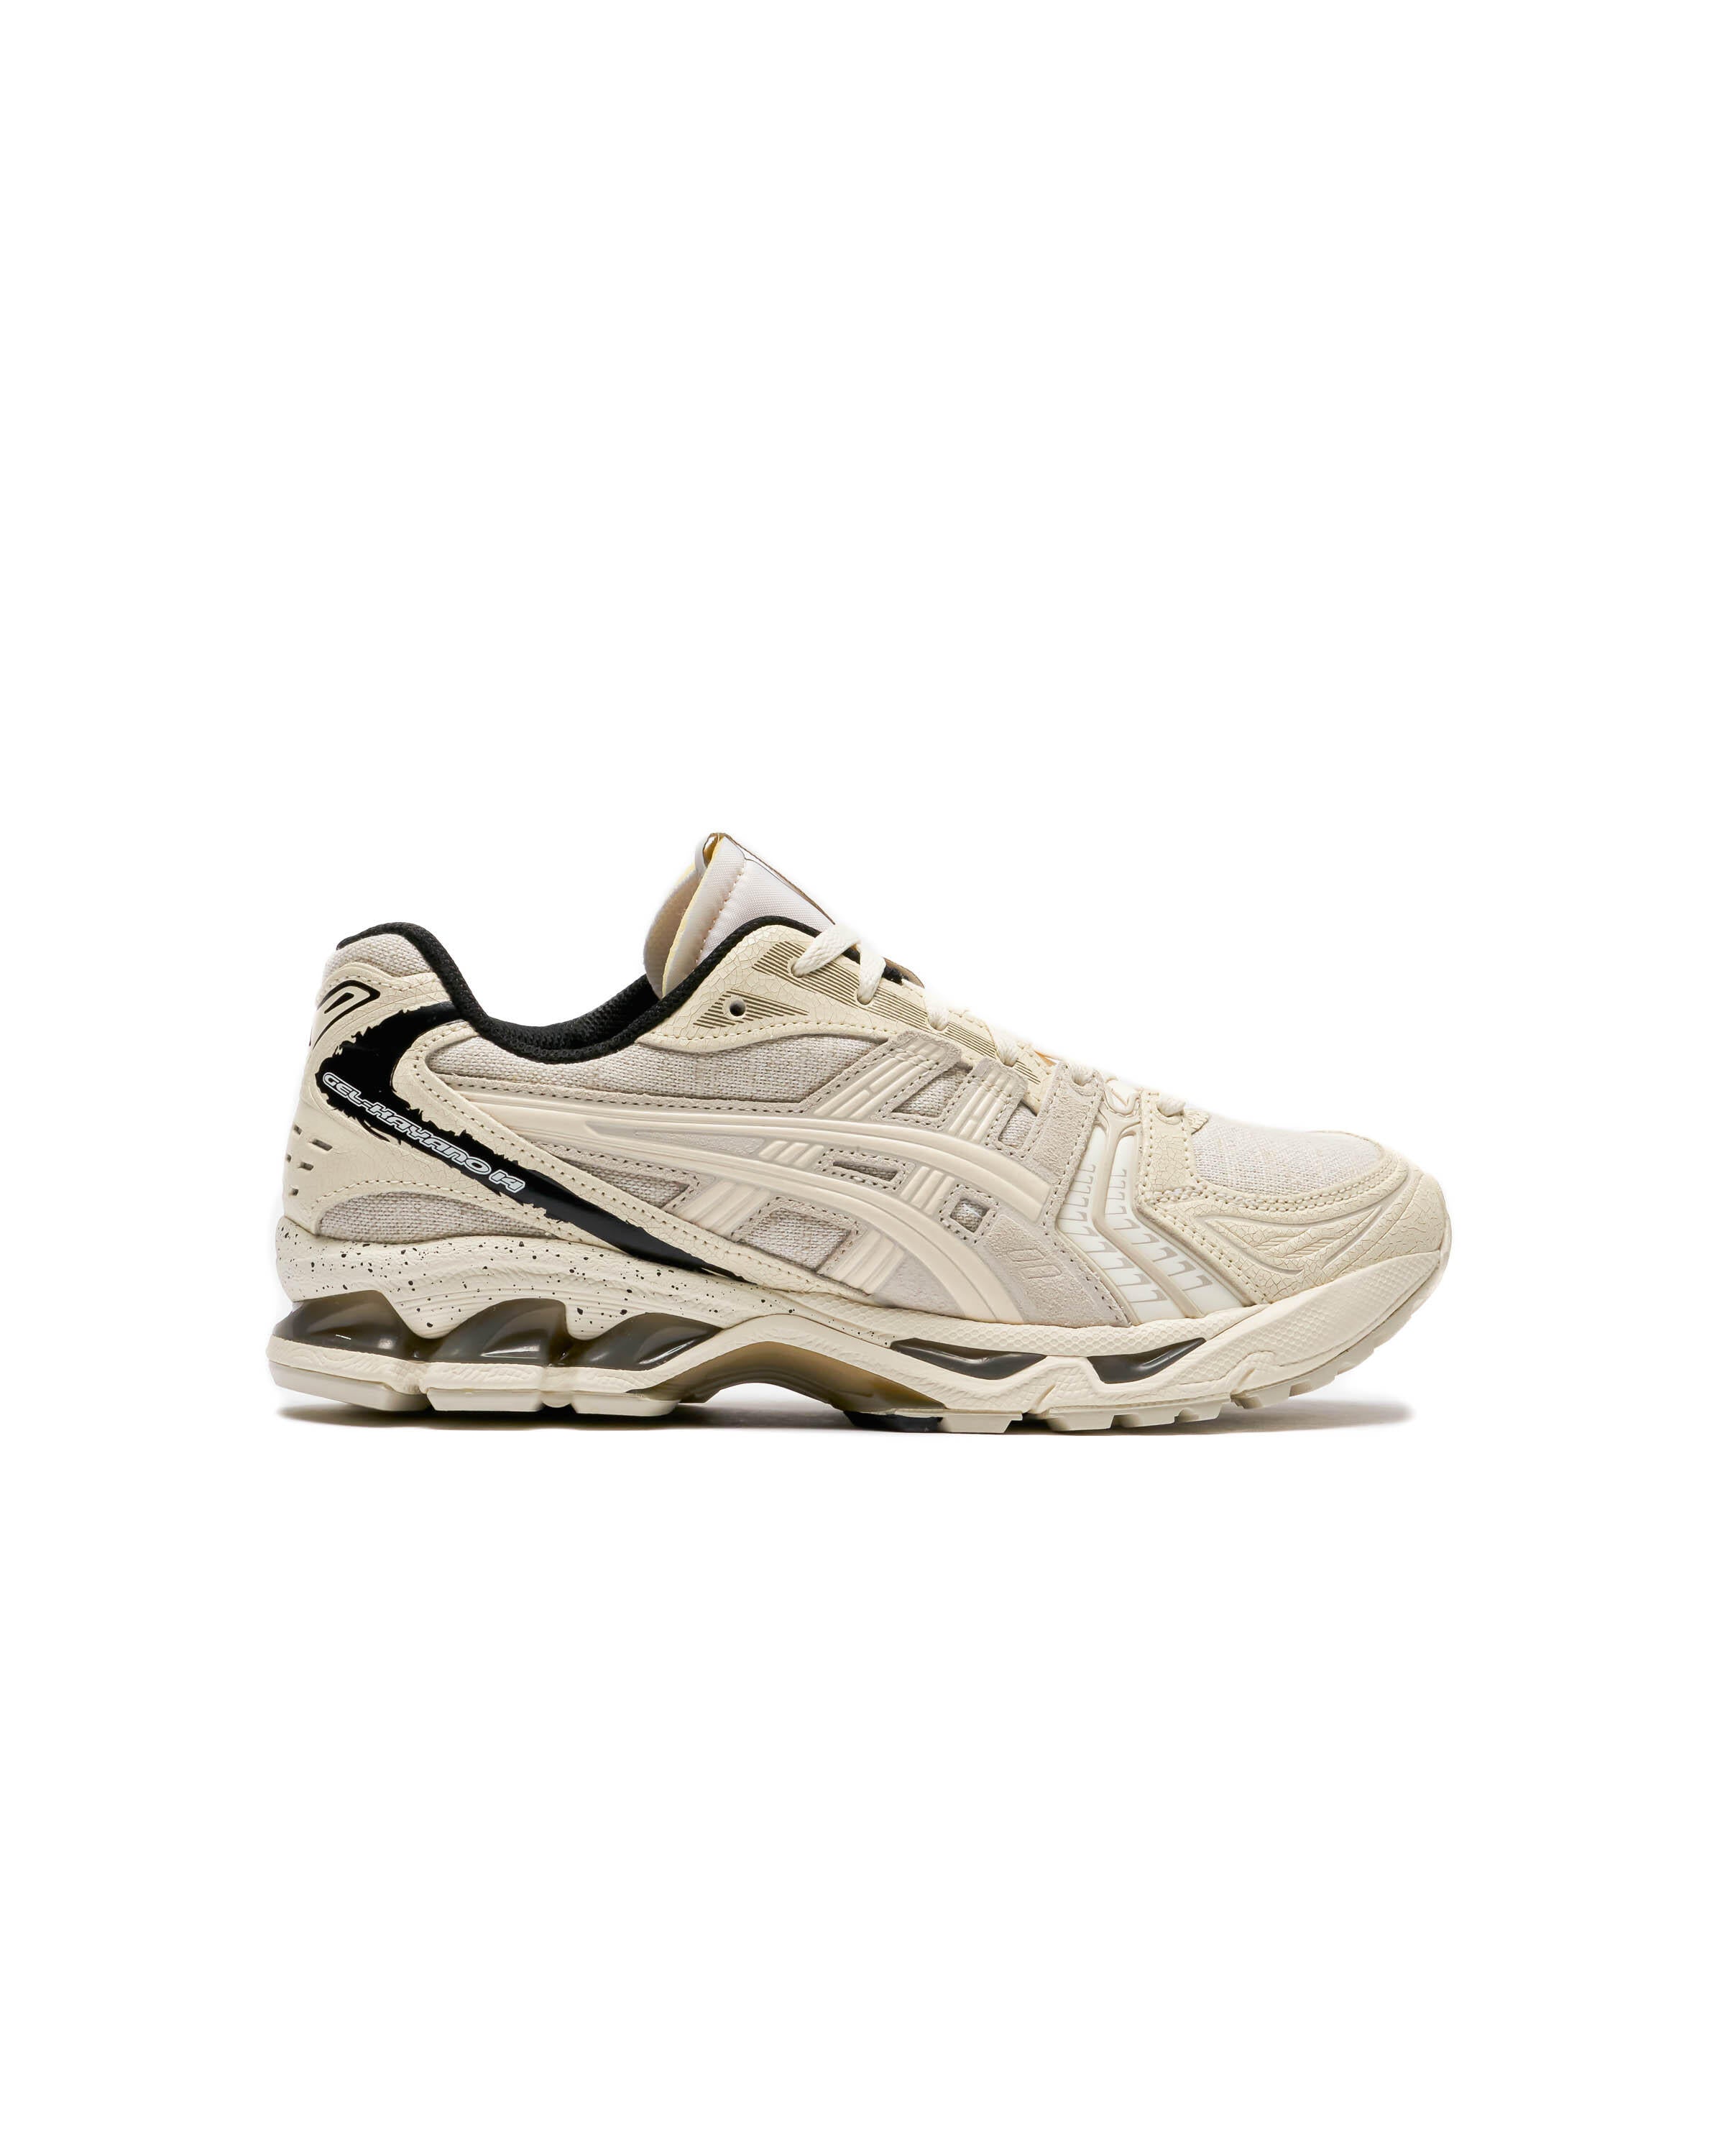 Asics GEL-KAYANO 14 'Imperfection' | 1203A416-100 | AFEW STORE